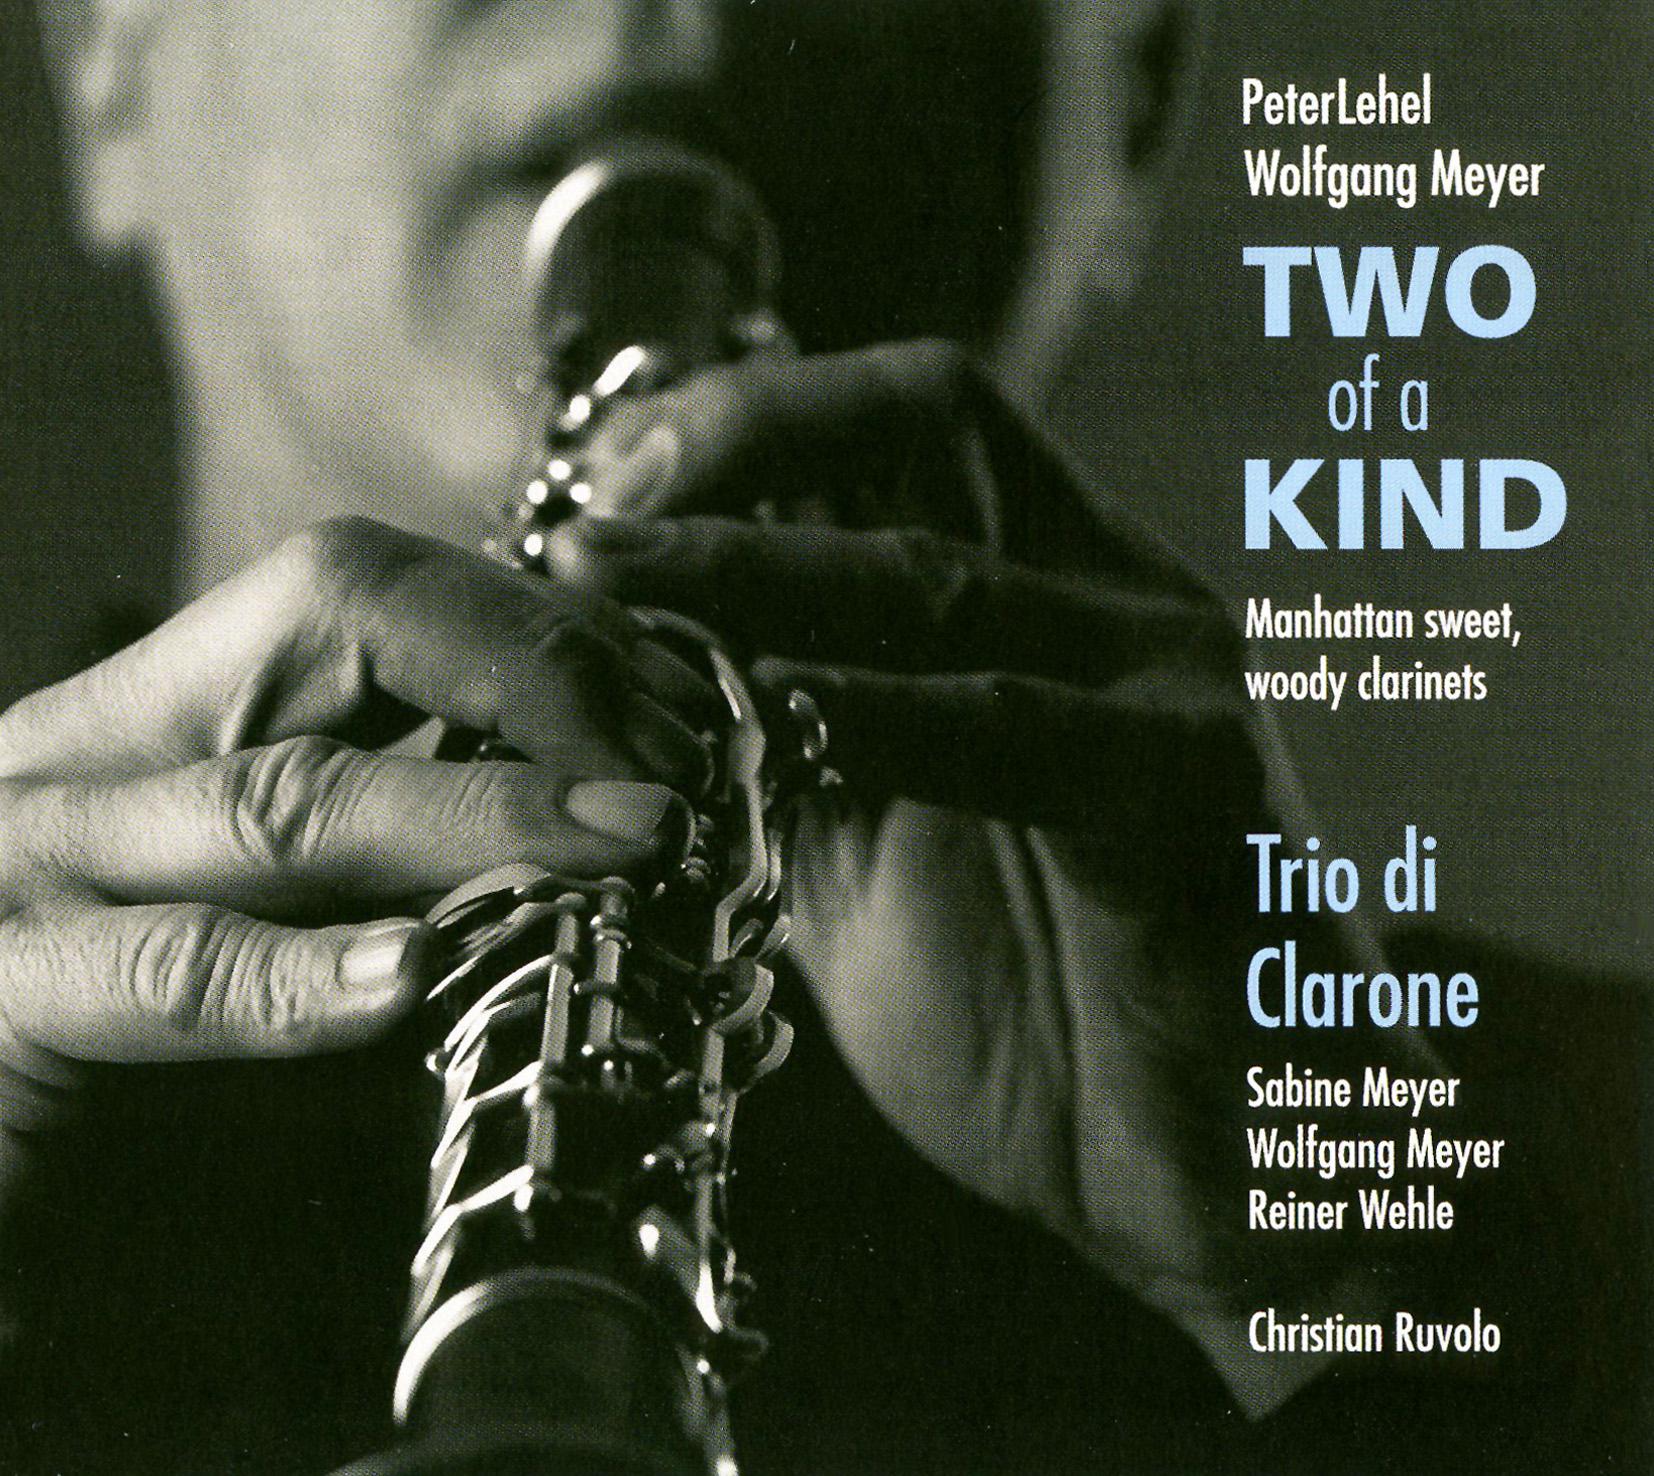 Two of a kind: No. 1. Concertinette